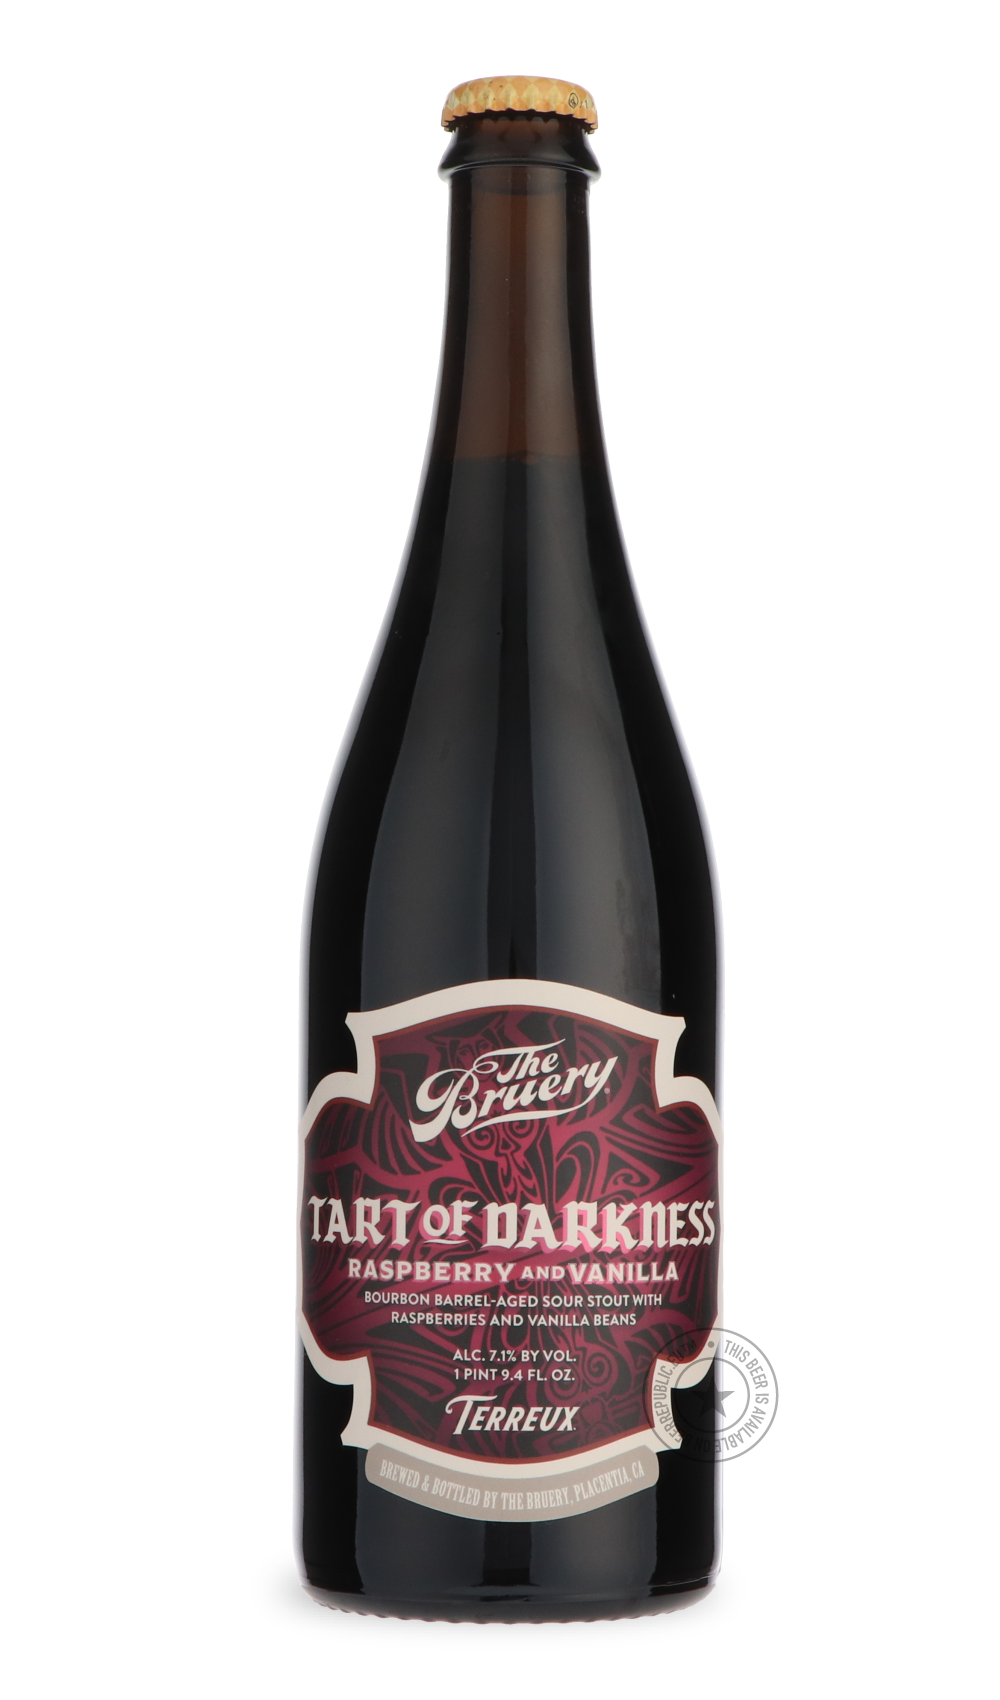 -The Bruery- Terreux Tart of Darkness With Raspberry And Vanilla-Sour / Wild & Fruity- Only @ Beer Republic - The best online beer store for American & Canadian craft beer - Buy beer online from the USA and Canada - Bier online kopen - Amerikaans bier kopen - Craft beer store - Craft beer kopen - Amerikanisch bier kaufen - Bier online kaufen - Acheter biere online - IPA - Stout - Porter - New England IPA - Hazy IPA - Imperial Stout - Barrel Aged - Barrel Aged Imperial Stout - Brown - Dark beer - Blond - Blo